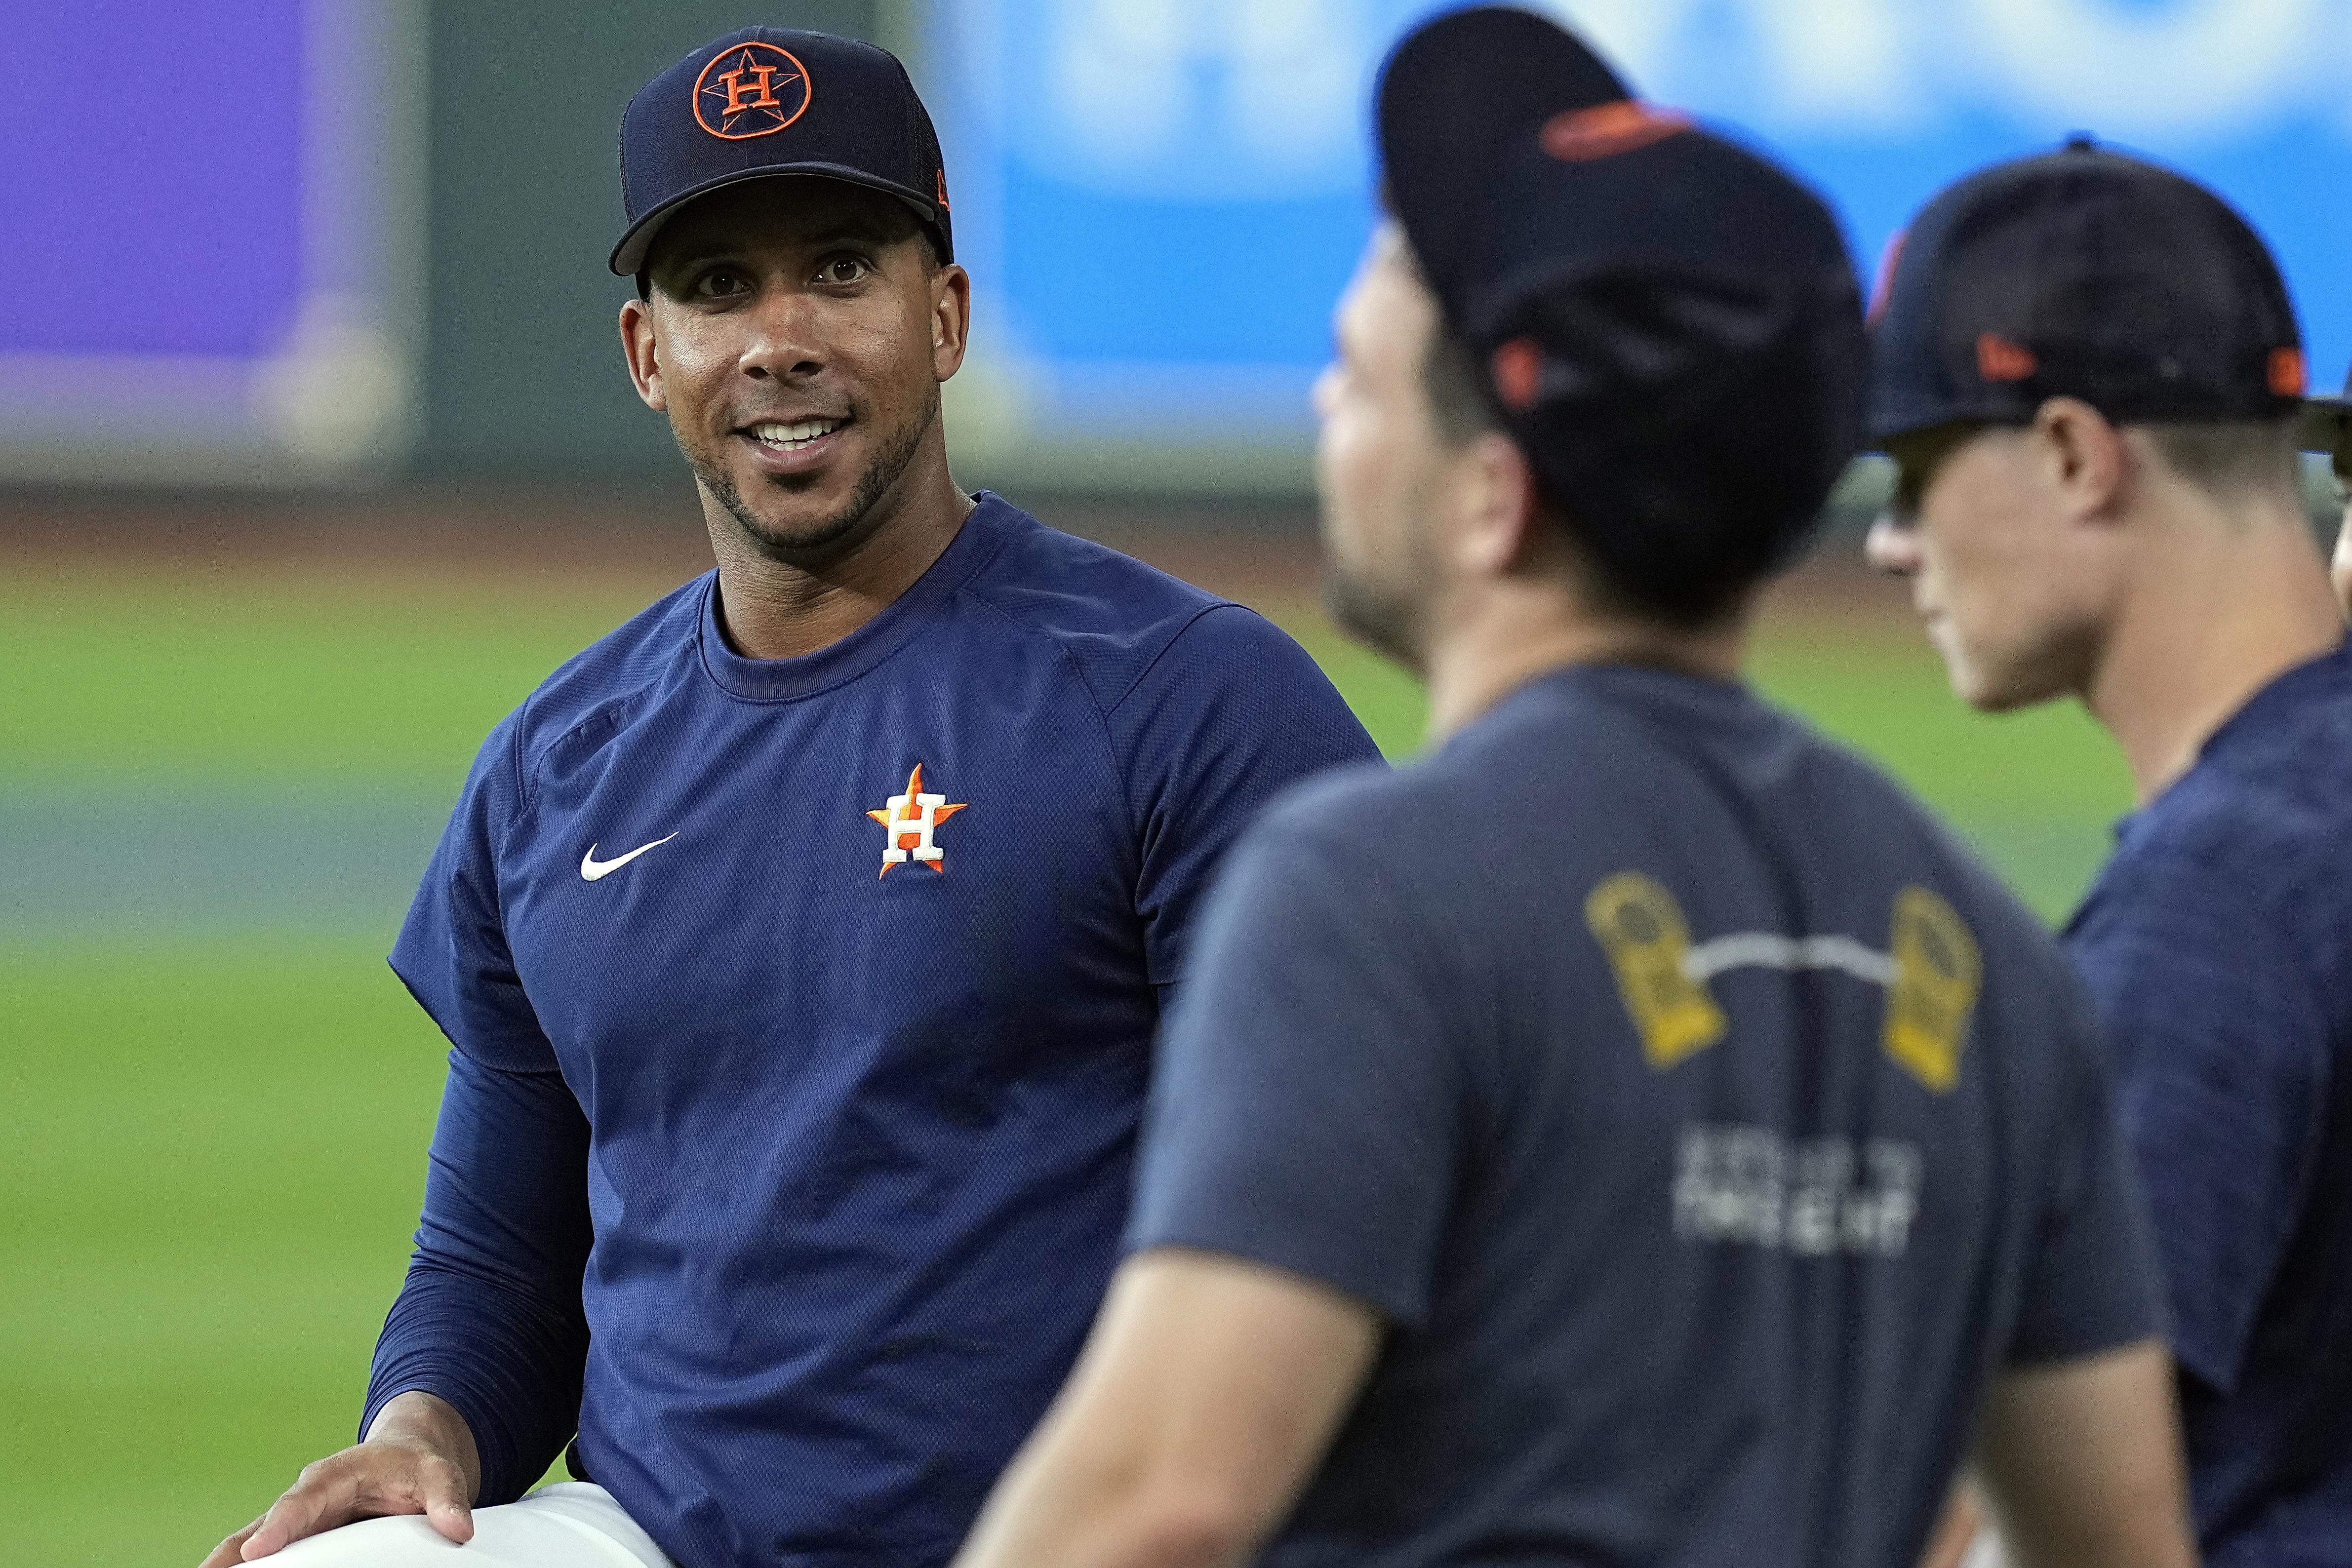 Astros' Michael Brantley Done for the Season, Leaving Many Questions